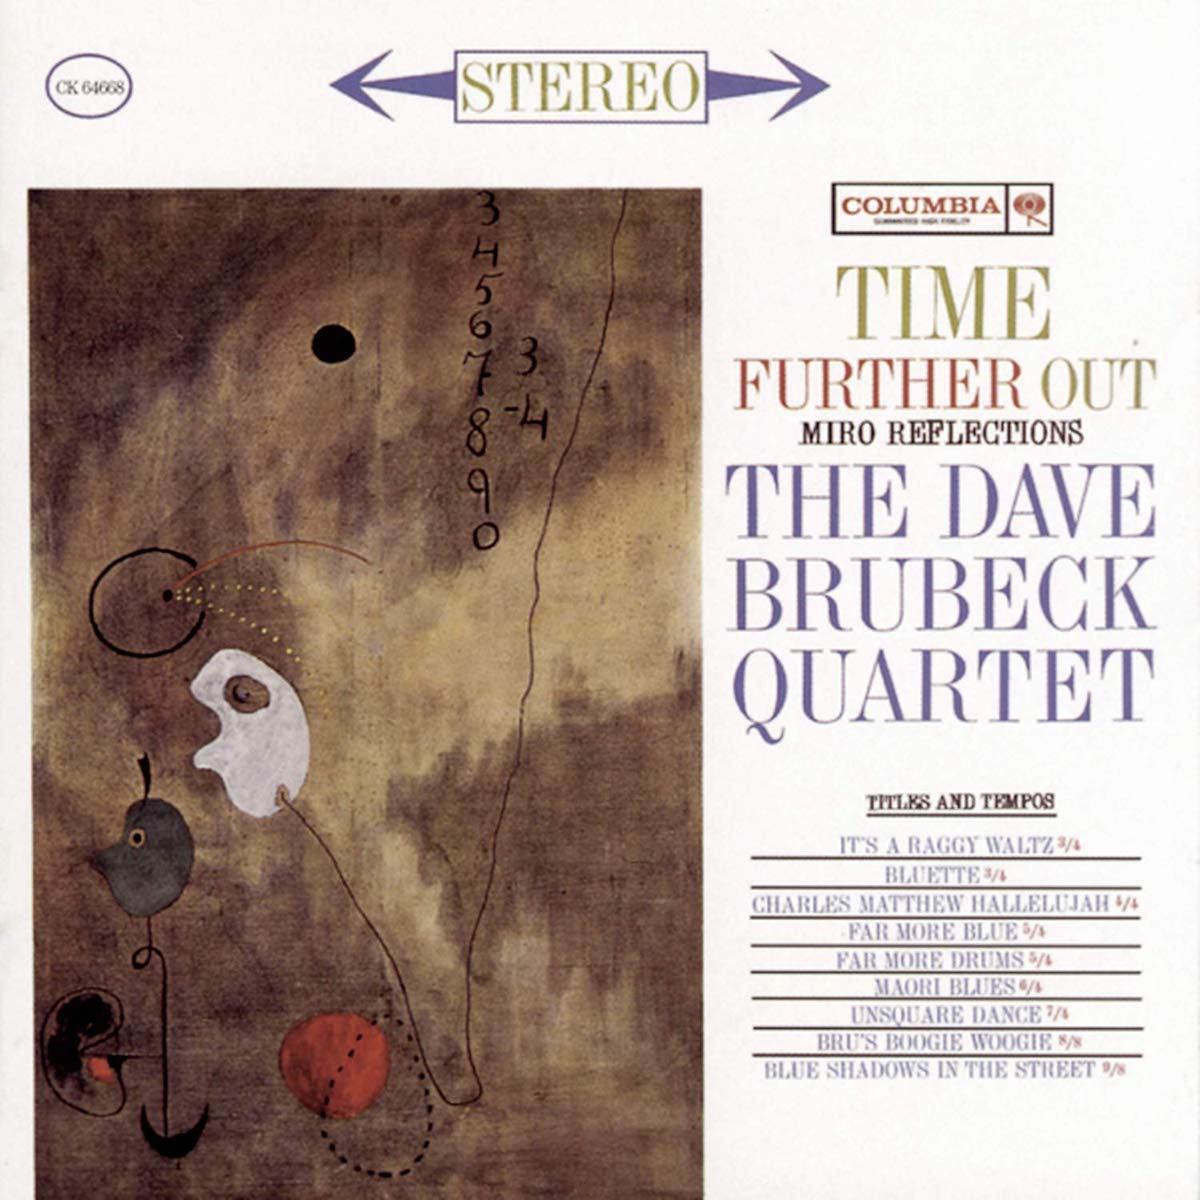 DAVE BRUBECK QUARTET - TIME FURTHER OUT/THE RIDDLE (2 CDS)